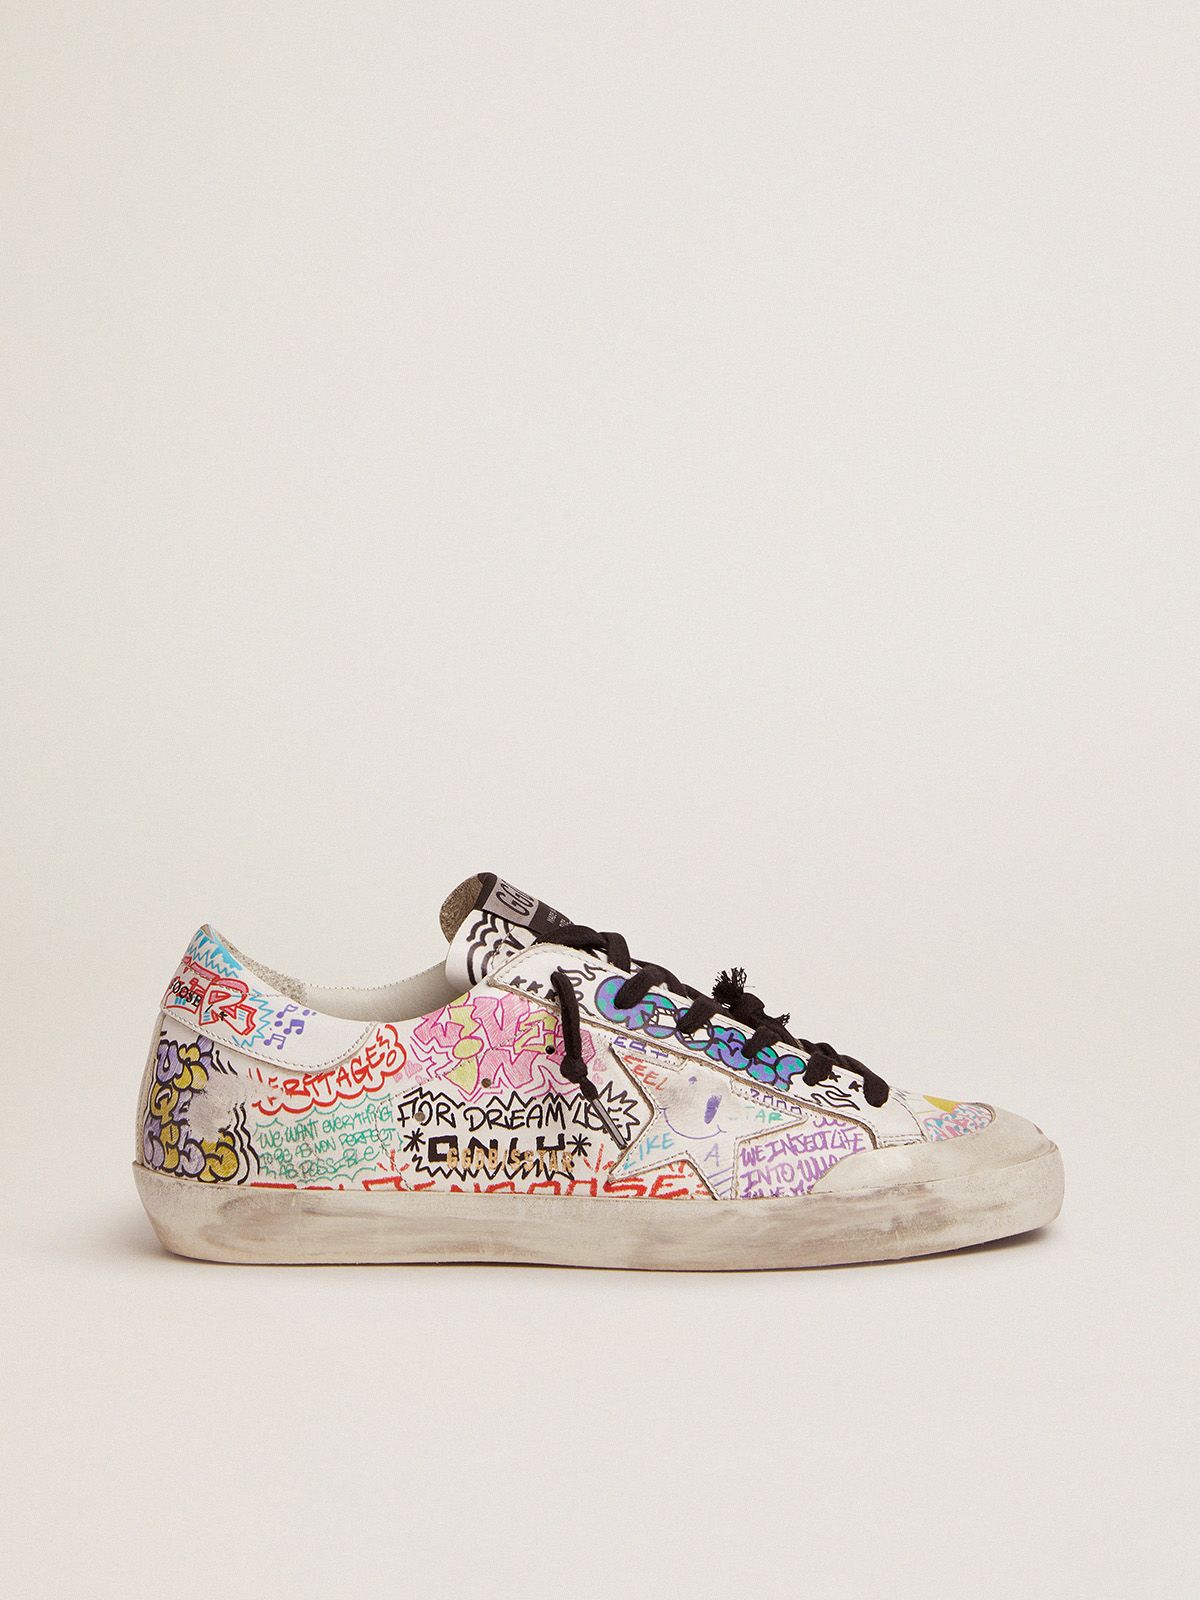 golden goose white Super-Star in leather graffiti sneakers multicolored with print